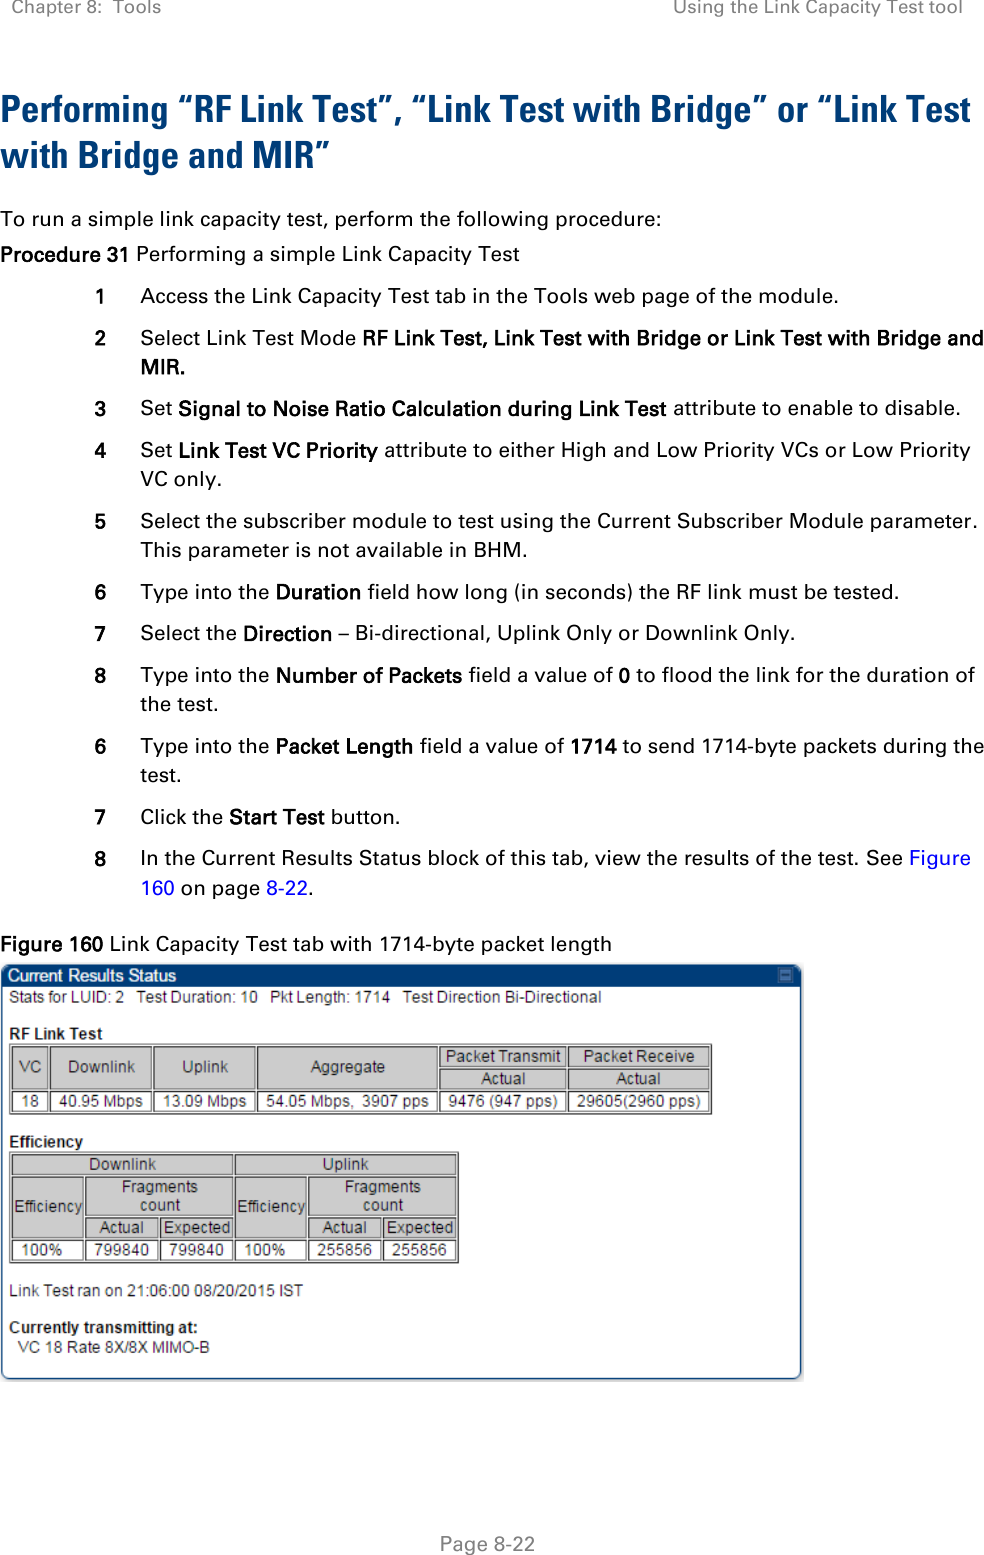 Chapter 8:  Tools Using the Link Capacity Test tool   Page 8-22 Performing “RF Link Test”, “Link Test with Bridge” or “Link Test with Bridge and MIR” To run a simple link capacity test, perform the following procedure: Procedure 31 Performing a simple Link Capacity Test 1 Access the Link Capacity Test tab in the Tools web page of the module. 2 Select Link Test Mode RF Link Test, Link Test with Bridge or Link Test with Bridge and MIR. 3 Set Signal to Noise Ratio Calculation during Link Test attribute to enable to disable. 4 Set Link Test VC Priority attribute to either High and Low Priority VCs or Low Priority VC only. 5 Select the subscriber module to test using the Current Subscriber Module parameter. This parameter is not available in BHM. 6 Type into the Duration field how long (in seconds) the RF link must be tested. 7 Select the Direction – Bi-directional, Uplink Only or Downlink Only. 8 Type into the Number of Packets field a value of 0 to flood the link for the duration of the test. 6 Type into the Packet Length field a value of 1714 to send 1714-byte packets during the test. 7 Click the Start Test button. 8 In the Current Results Status block of this tab, view the results of the test. See Figure 160 on page 8-22. Figure 160 Link Capacity Test tab with 1714-byte packet length   